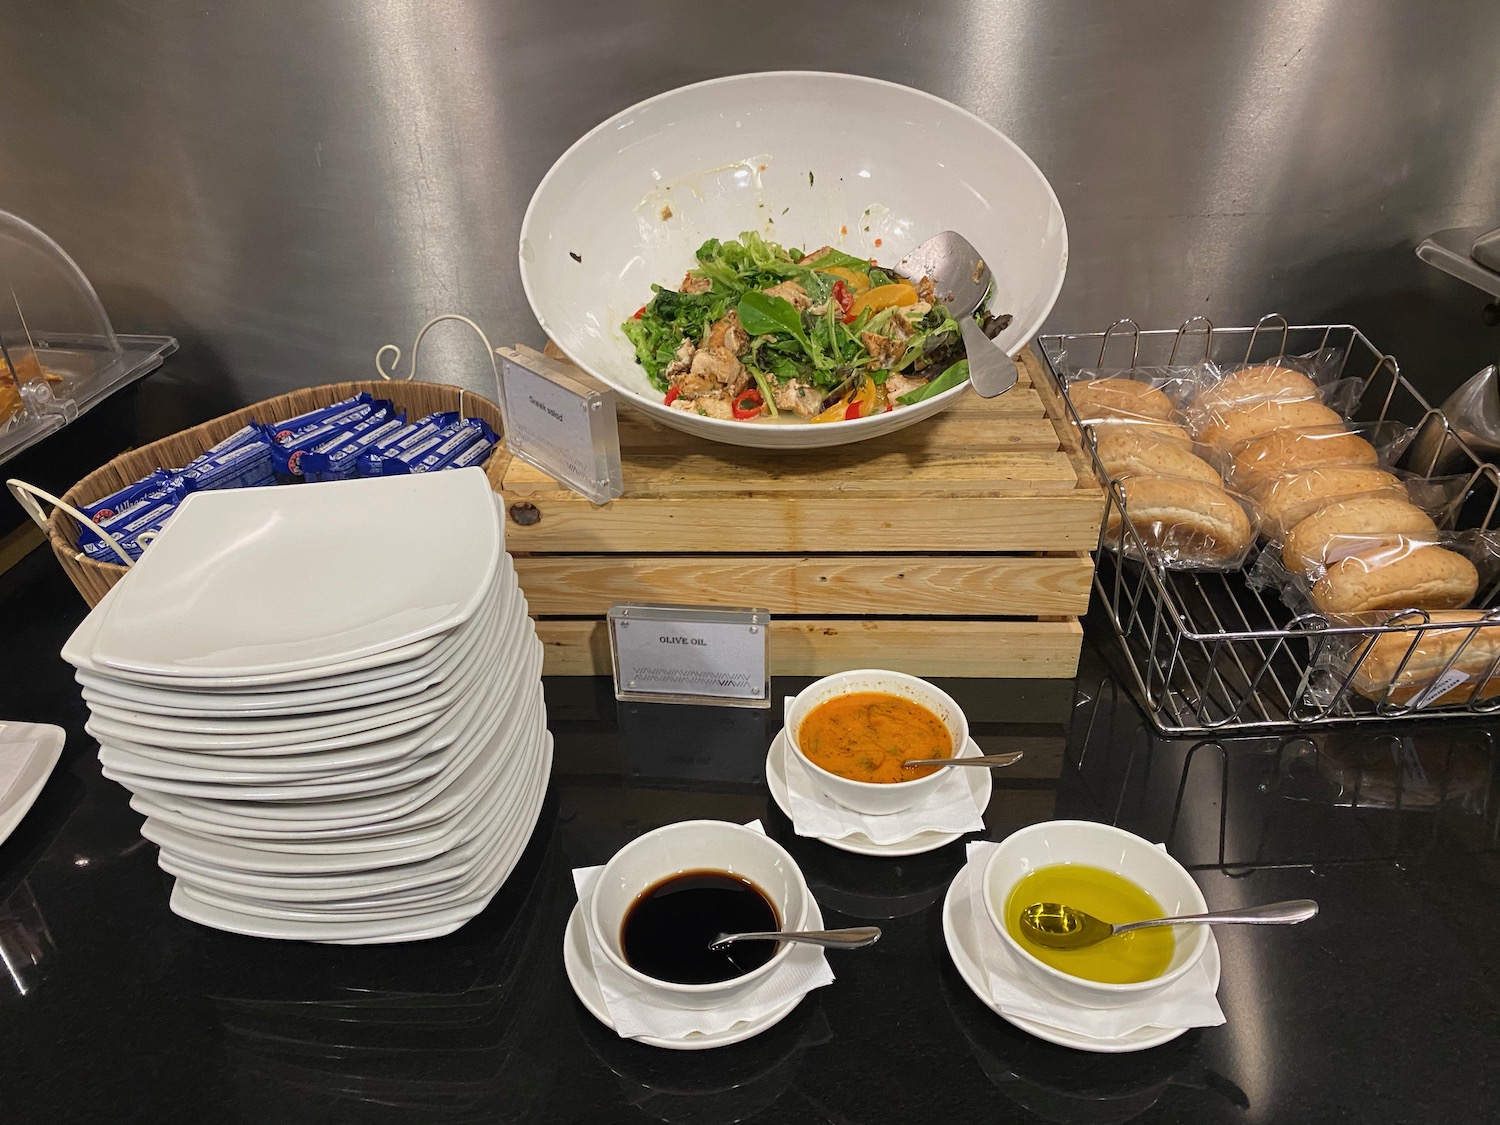 a bowl of salad and plates on a table